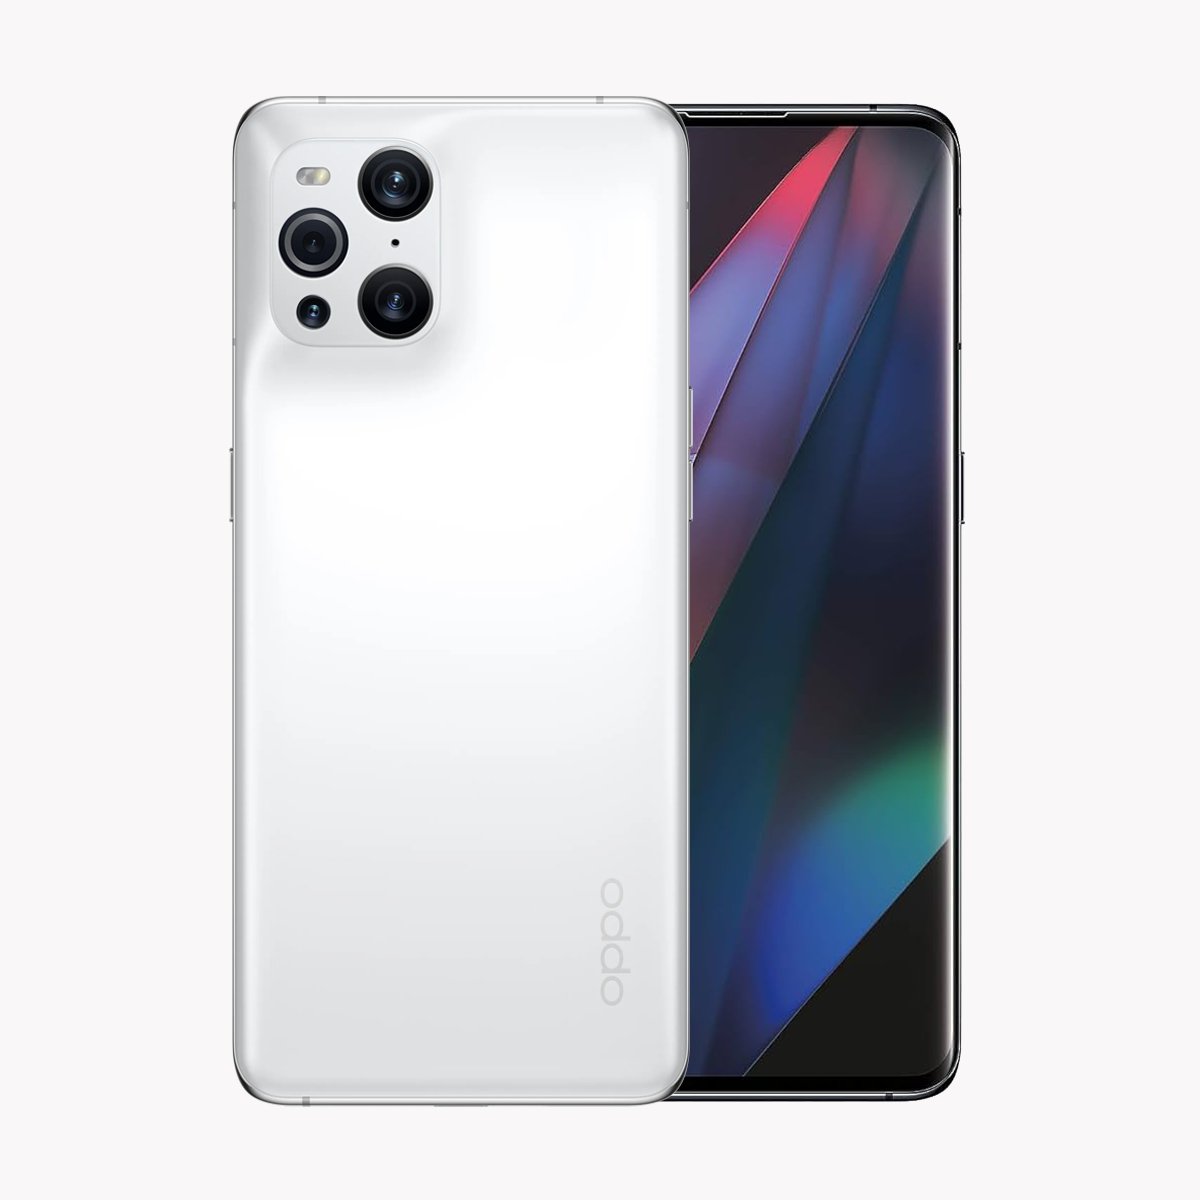 Oppo Find X3 Pro - Tech Tiger